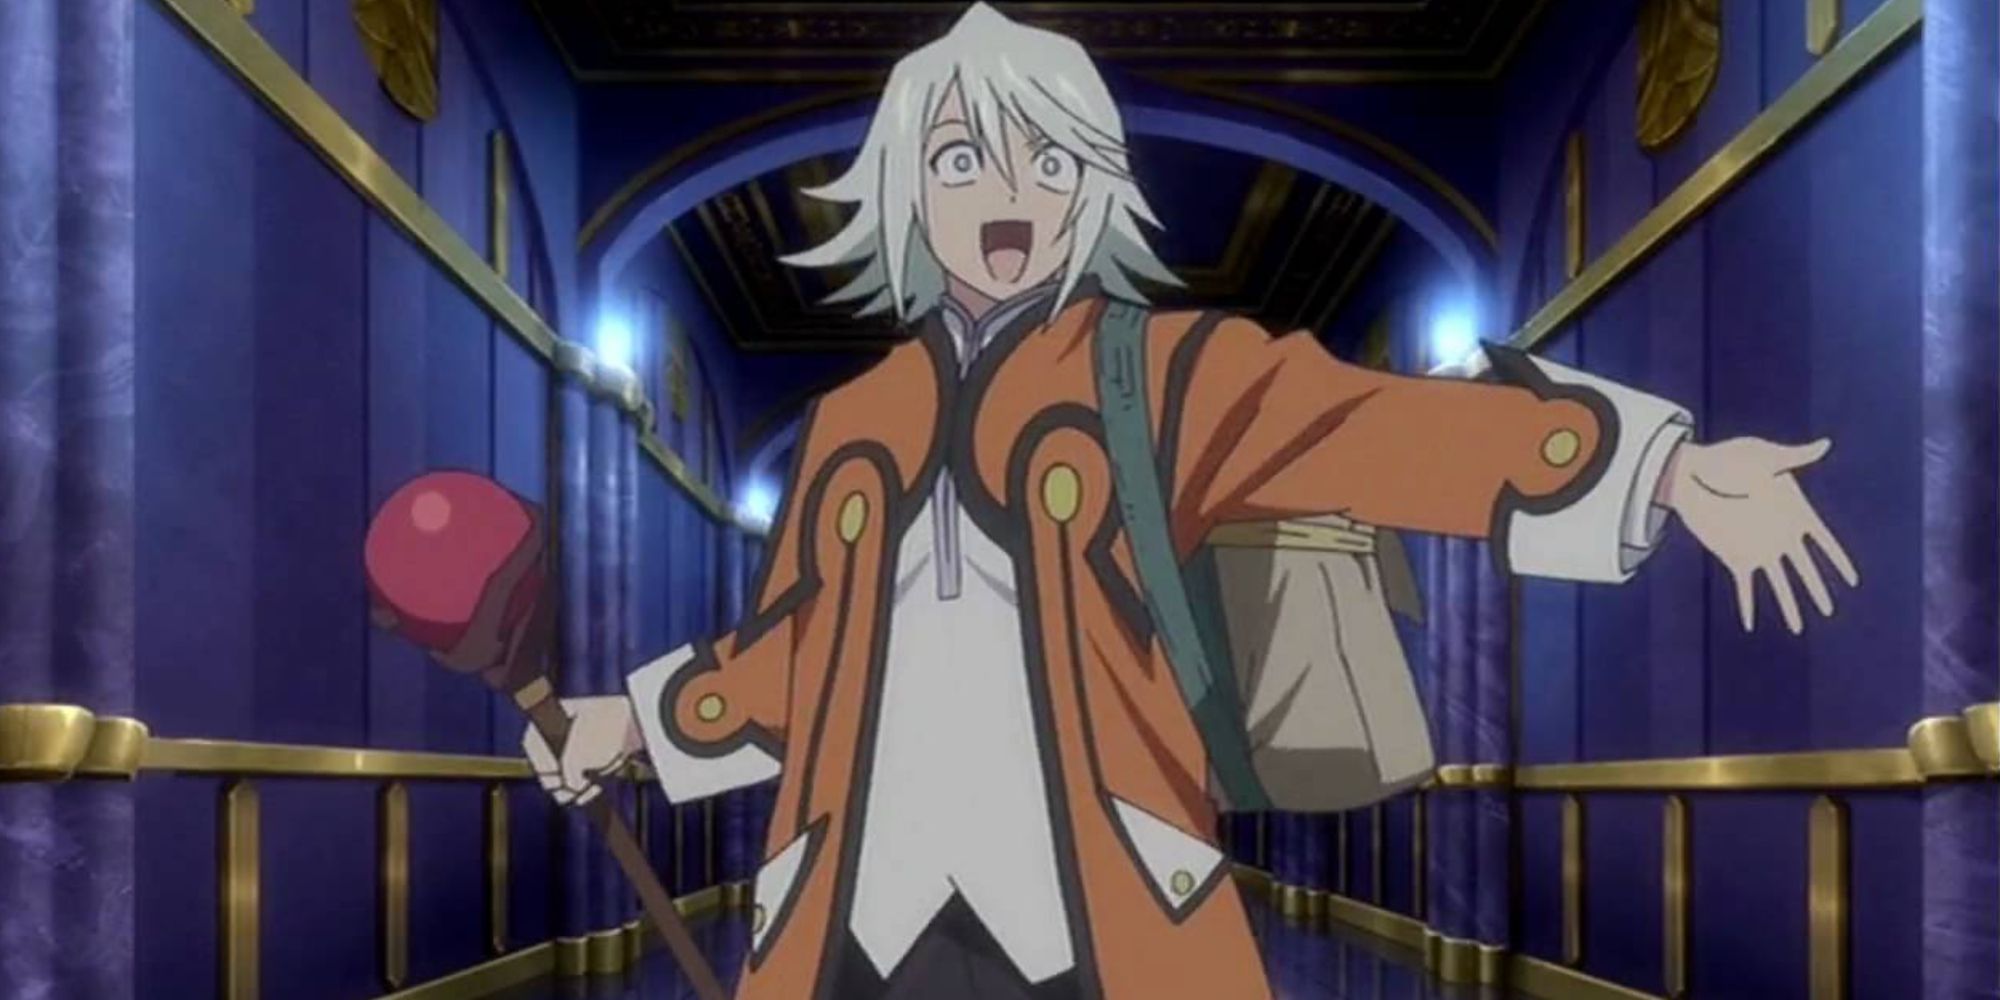 An image of Raine from Tales of Symphonia Remastered, gesturing wildly in the halls of a building.